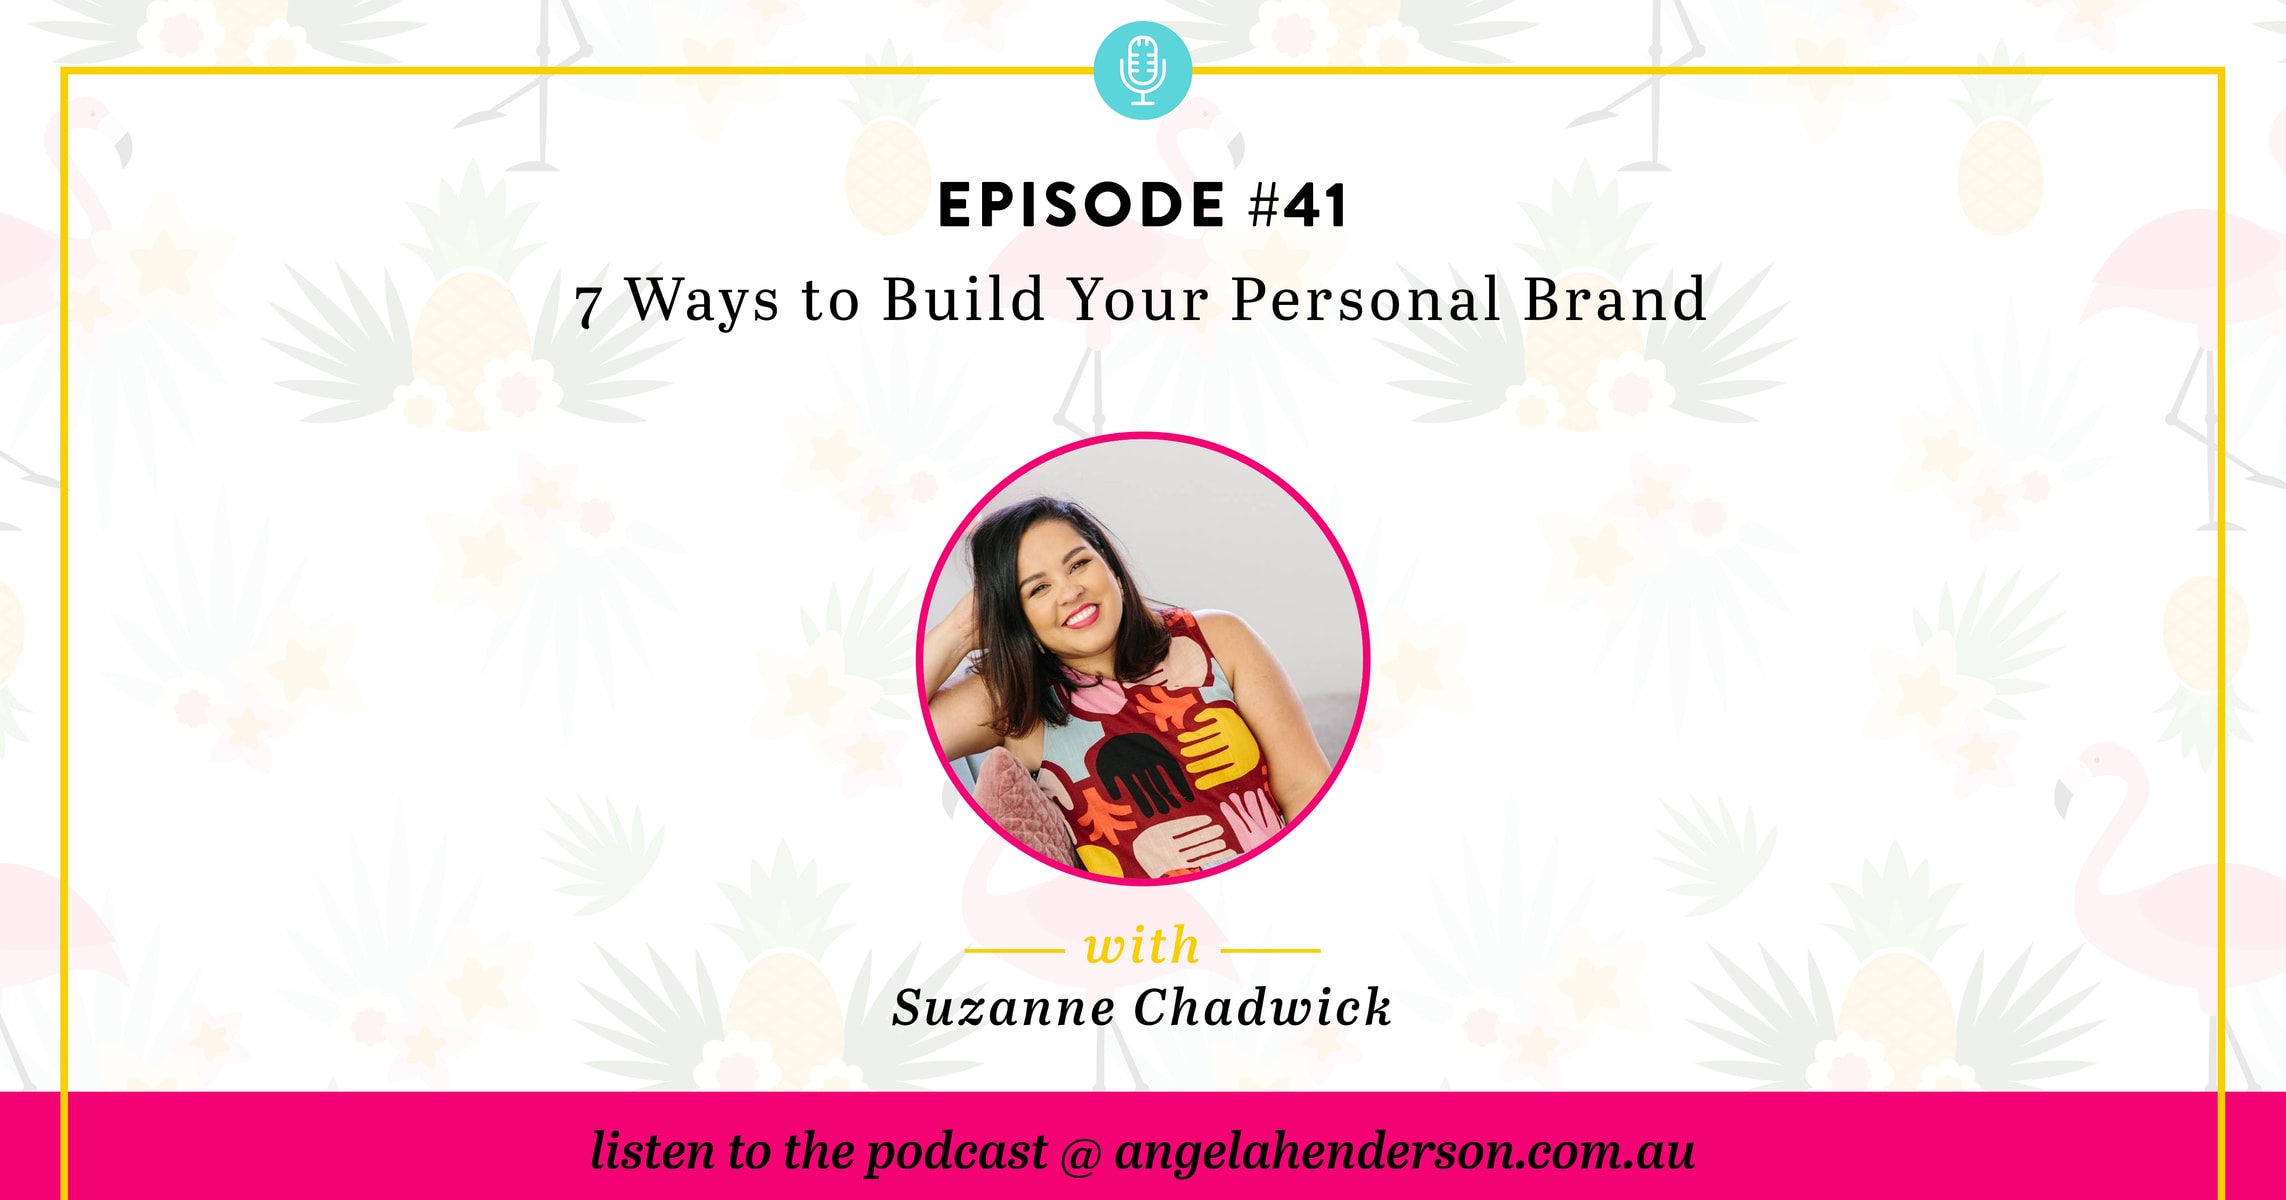 7 Ways to Build Your Personal Brand